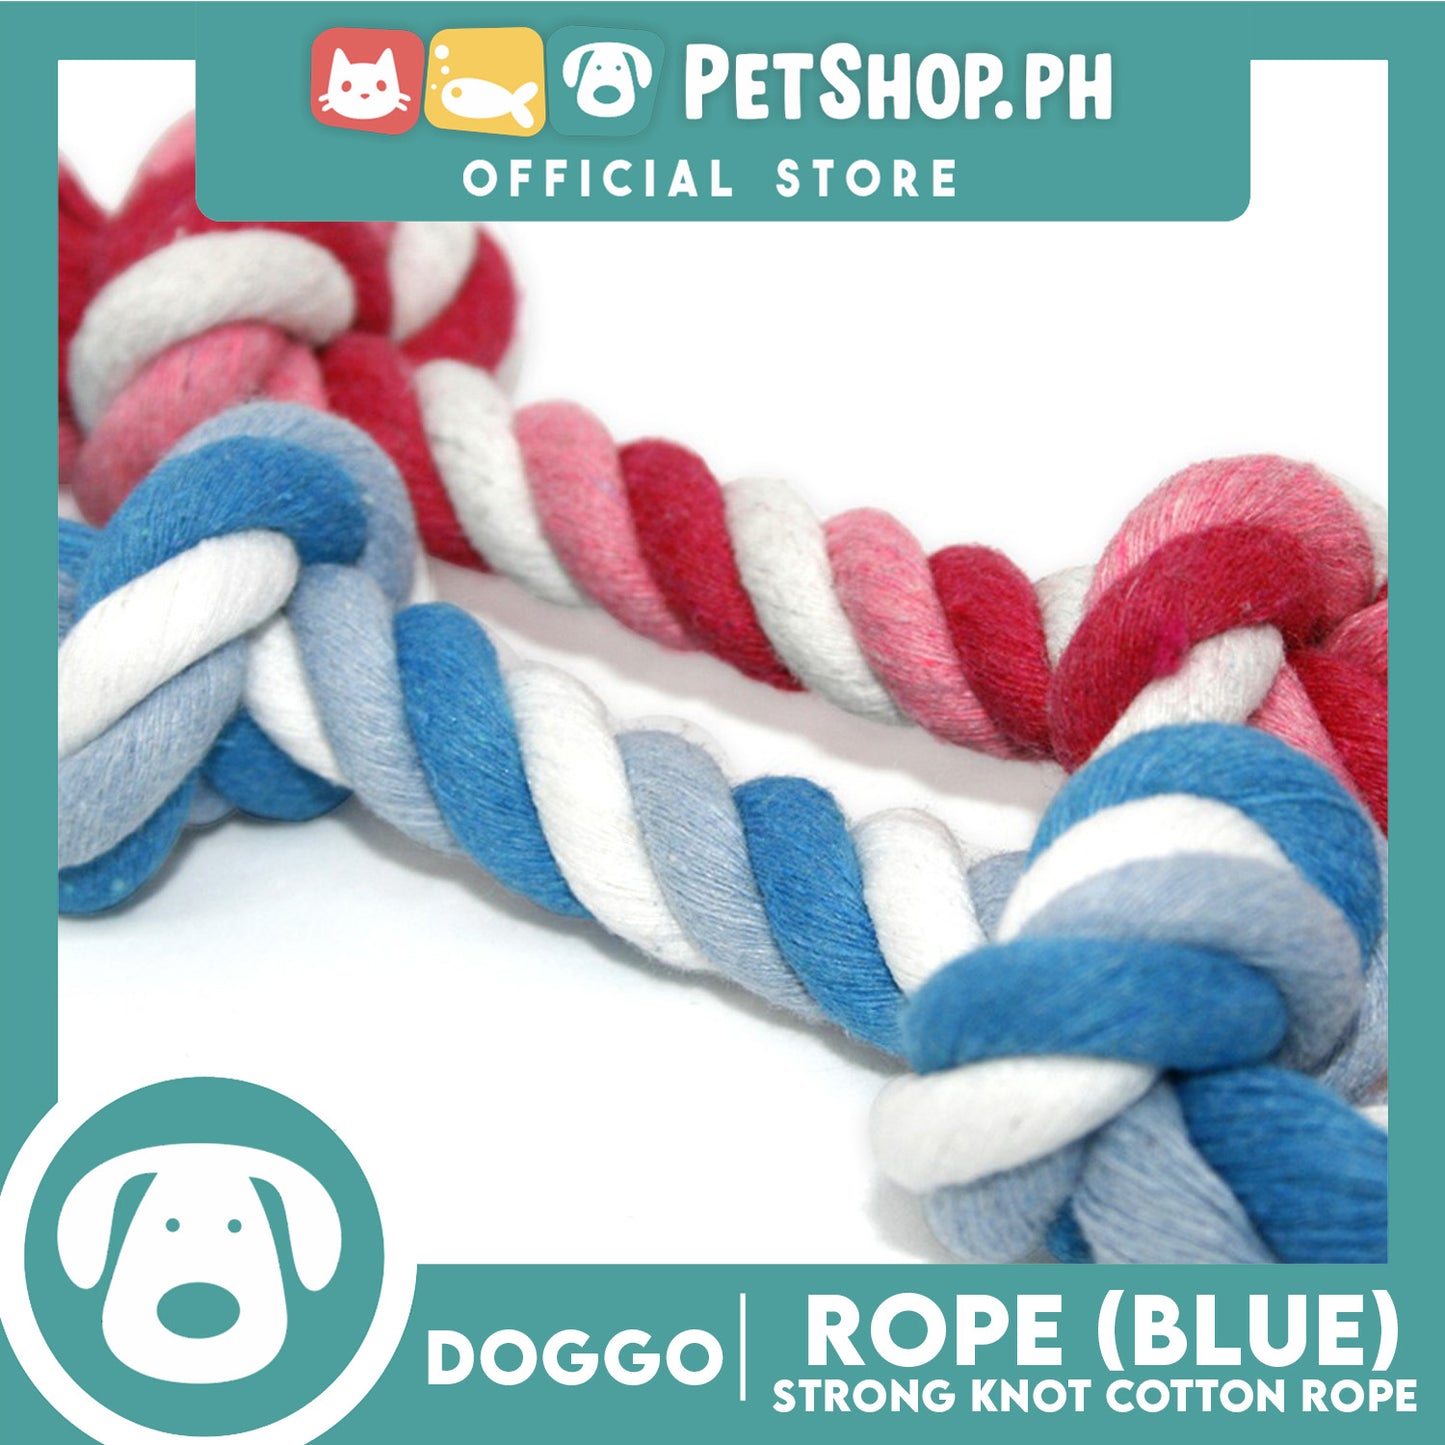 Doggo Rope Thick Fiber 11' ' Large Size (Blue) Perfect Toy for Dog